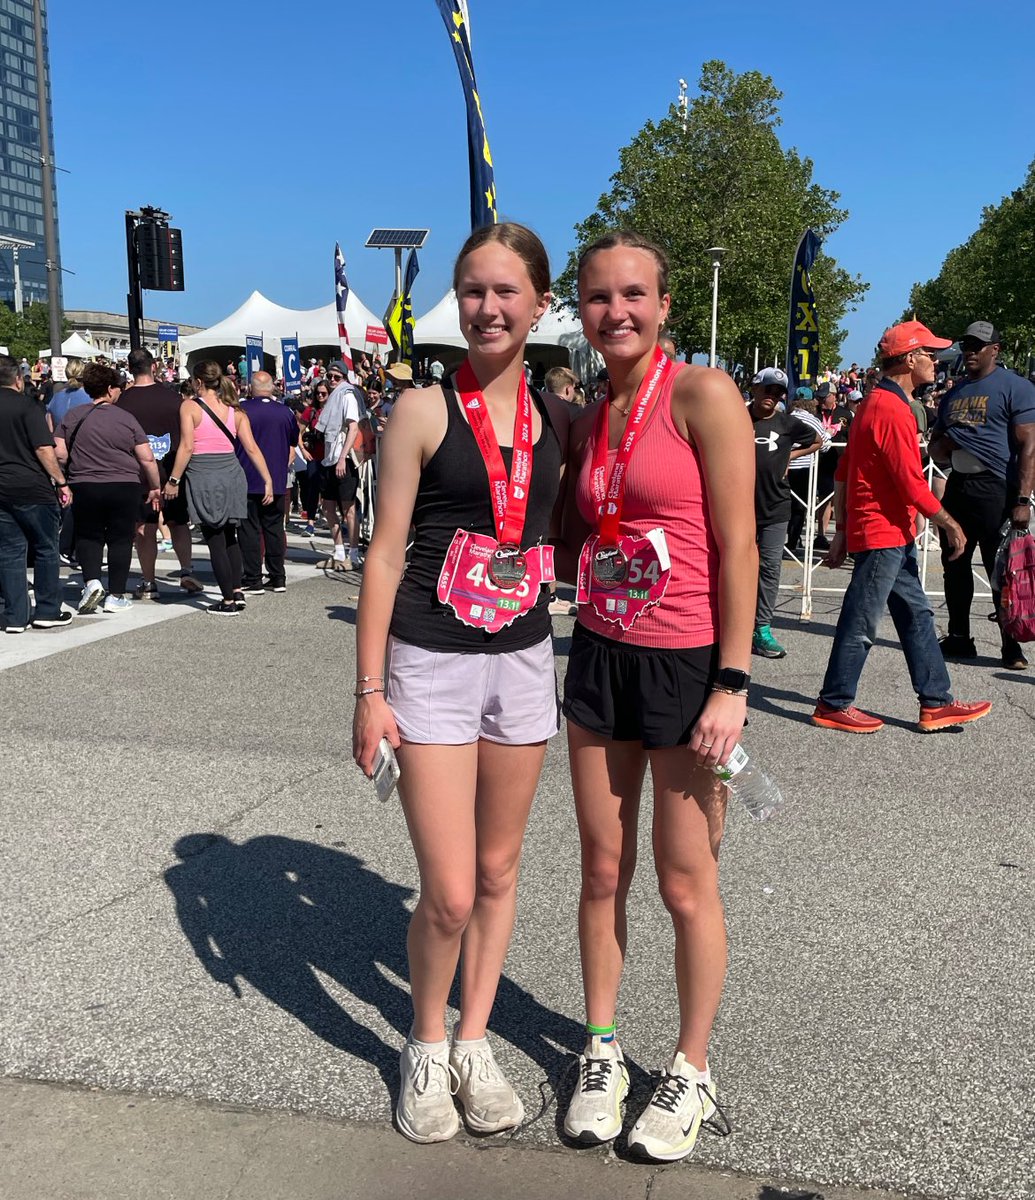 Huge shout out to @GenevieveVoight and @maddiesollars13 who completed the Cleveland Half Marathon today! We are so proud of you! 💪🏼